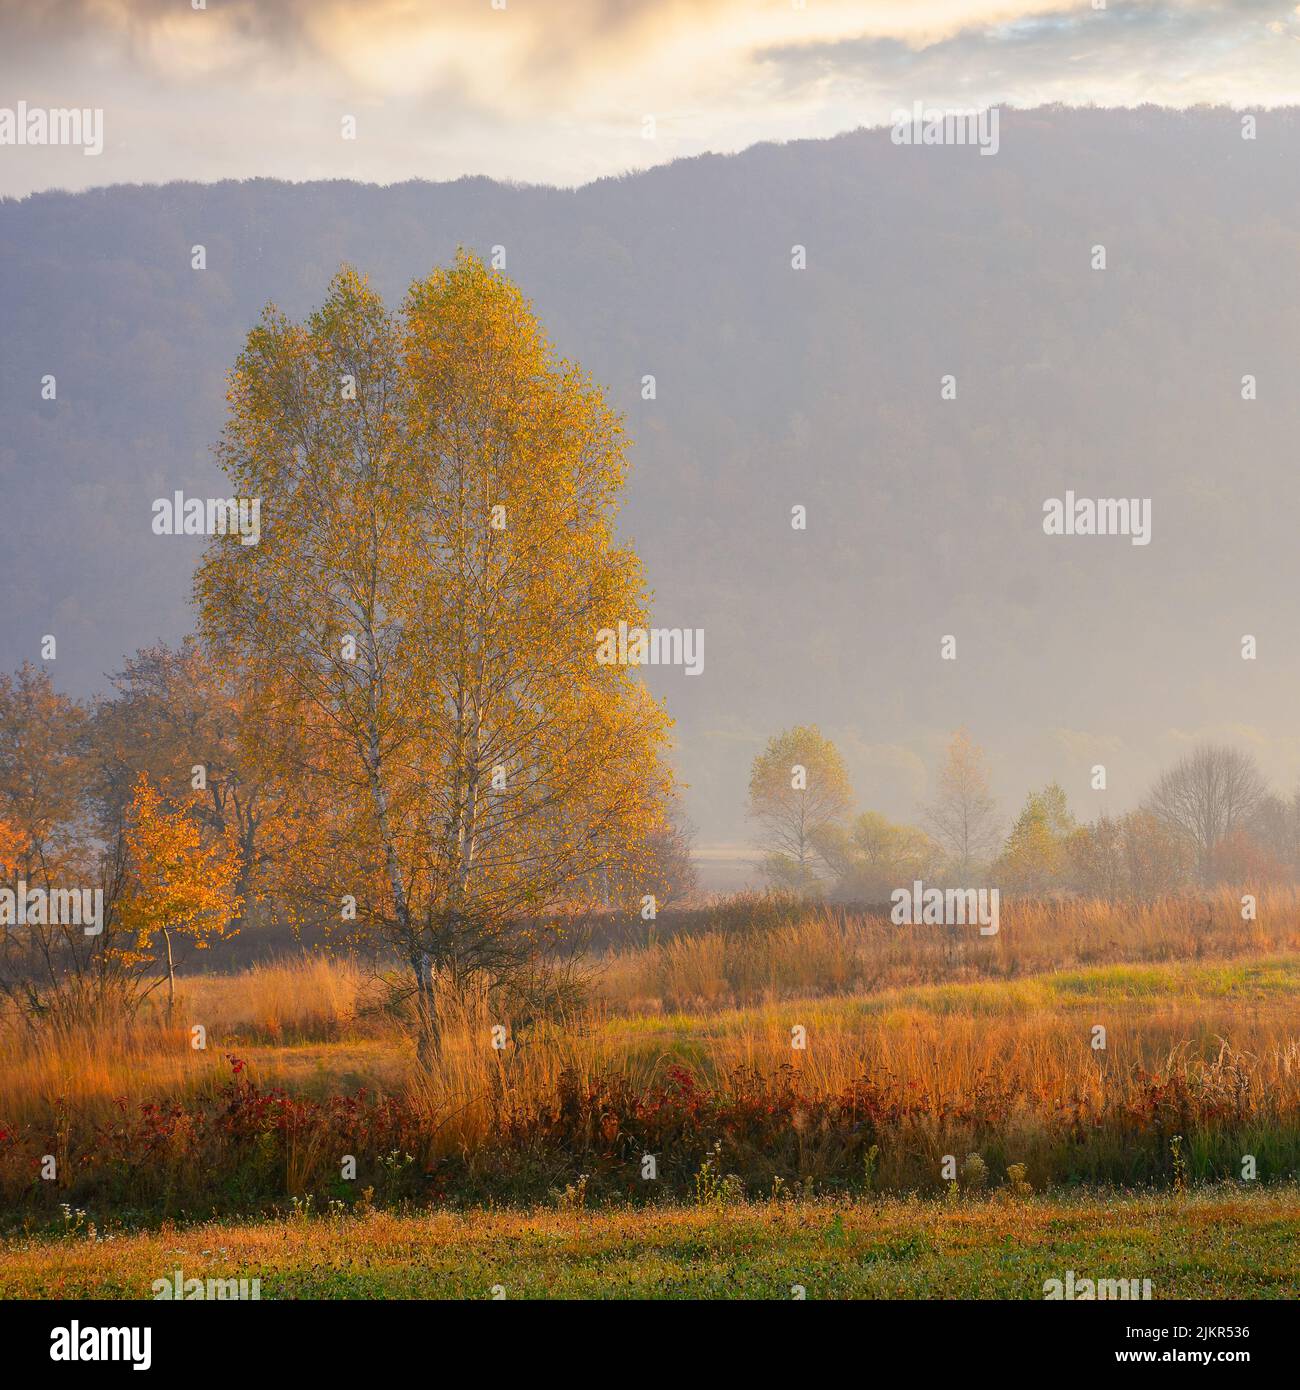 rural fields in autumnal countryside. colorful mountain landscape on a misty morning. trees in fall foliage Stock Photo